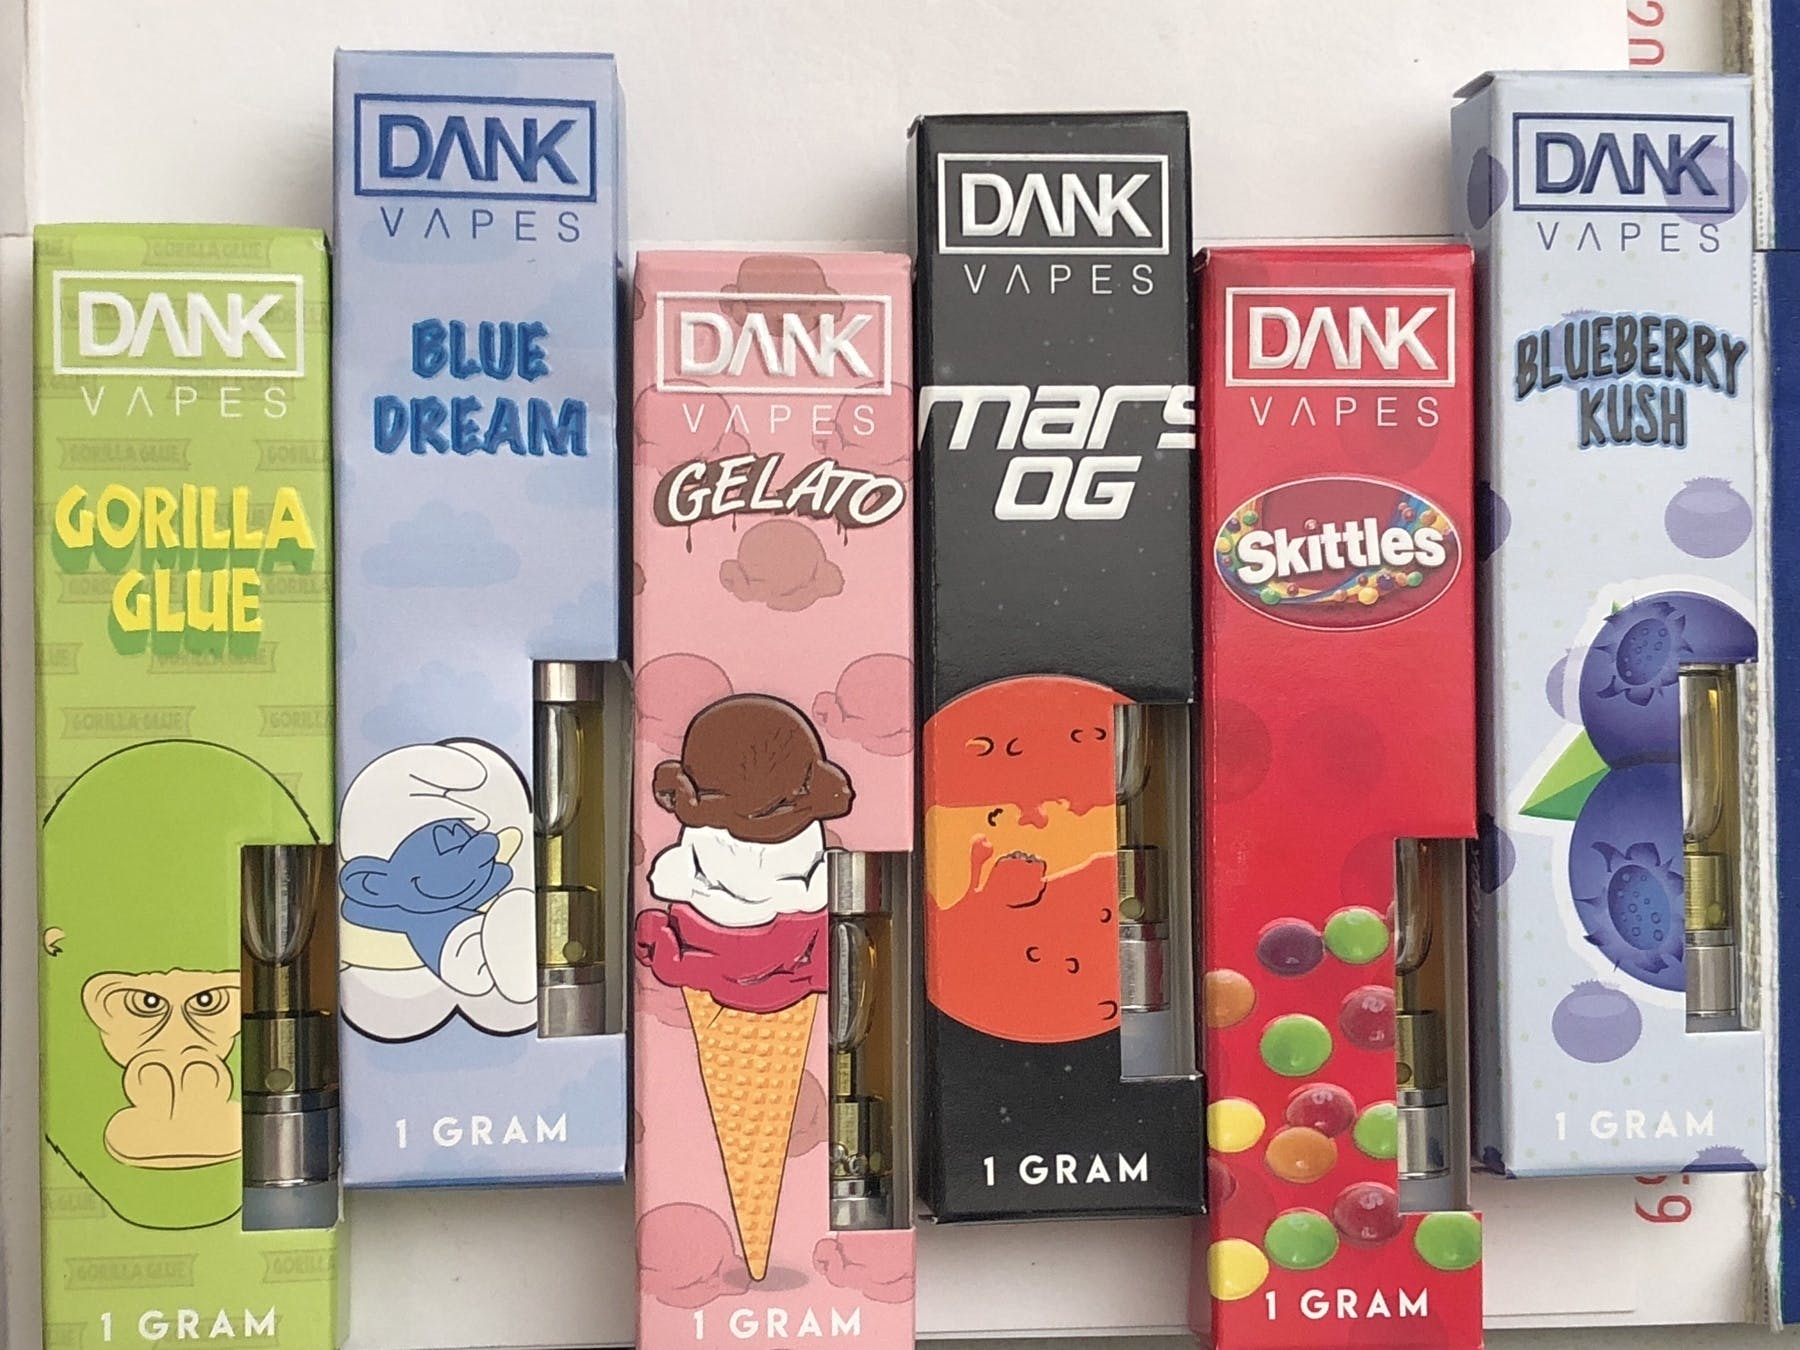 concentrate-dank-vapes-2-for-50-21-mix-and-match